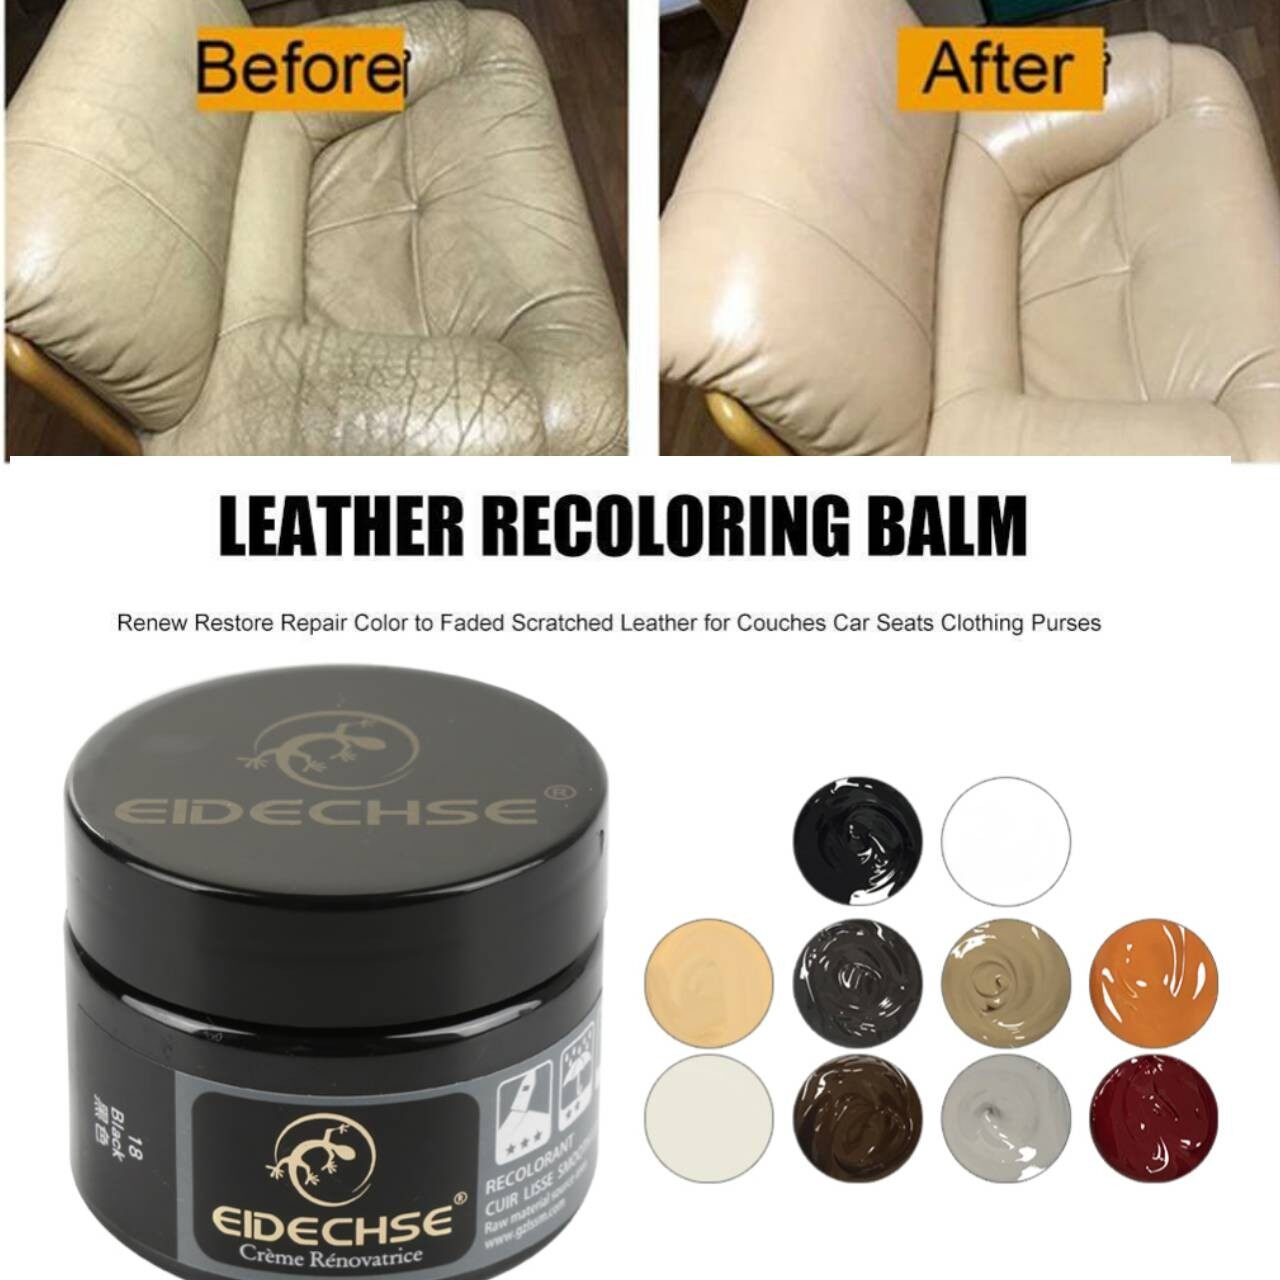  Leather Leather Repair Gel For Furniture,Leather Scratch Repair  For Refurbishing For Upholstery,Couch,Boat,Car Seats,Leather Dye For  Sofa,Vinyl Repair Gel For Jacket,Shoes,Leather Filler,Leather Paint :  Automotive